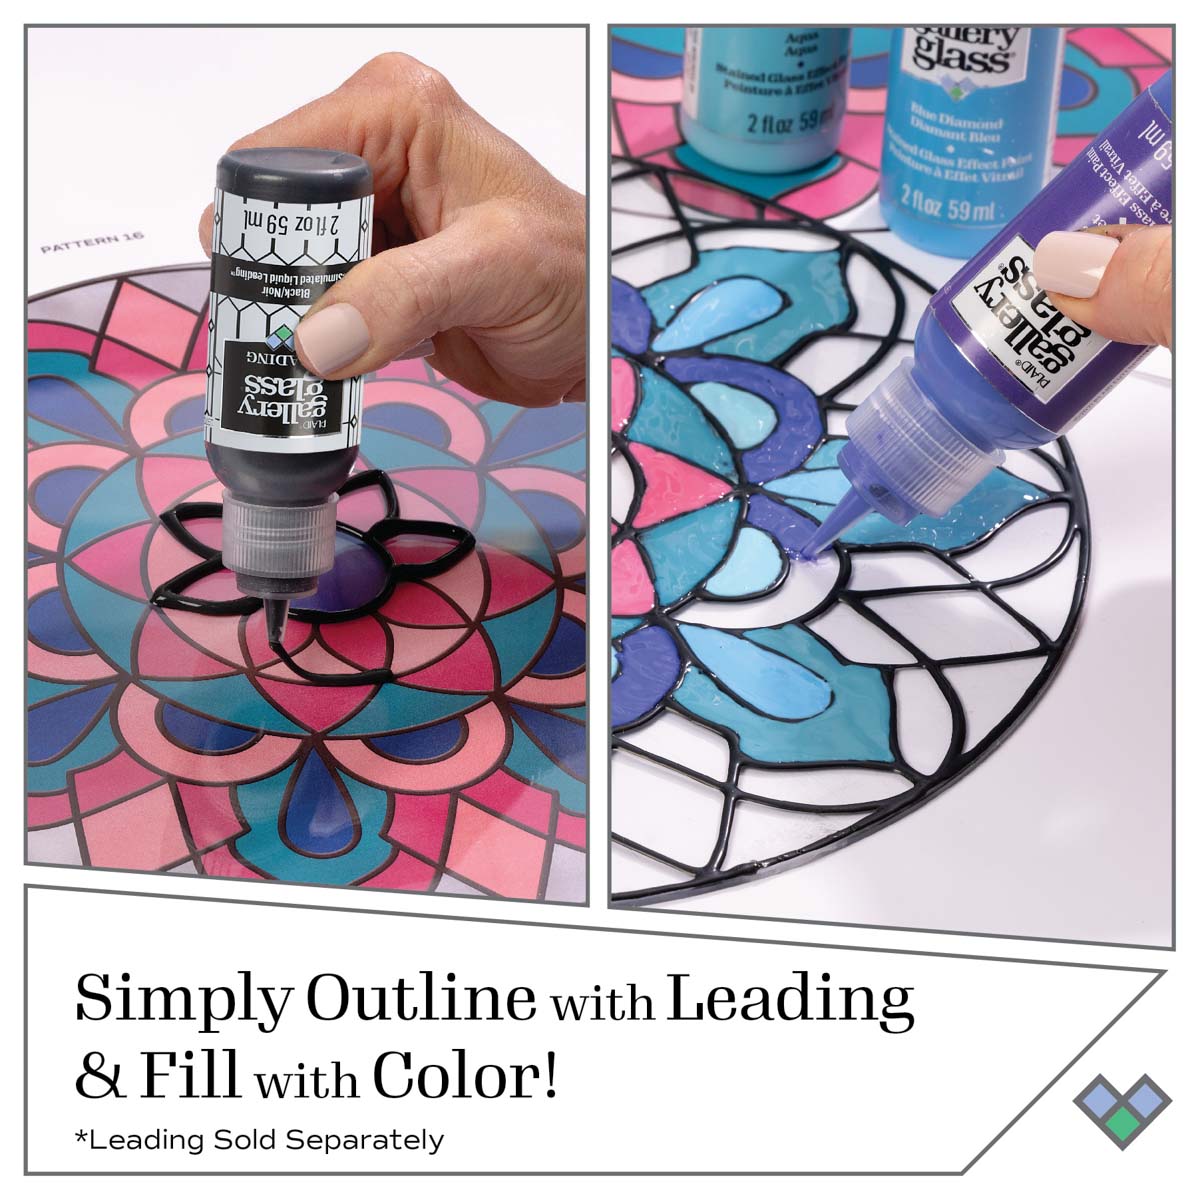 Gallery Glass ® Stained Glass Effect Paint - Bright White, 2 oz. - 19692